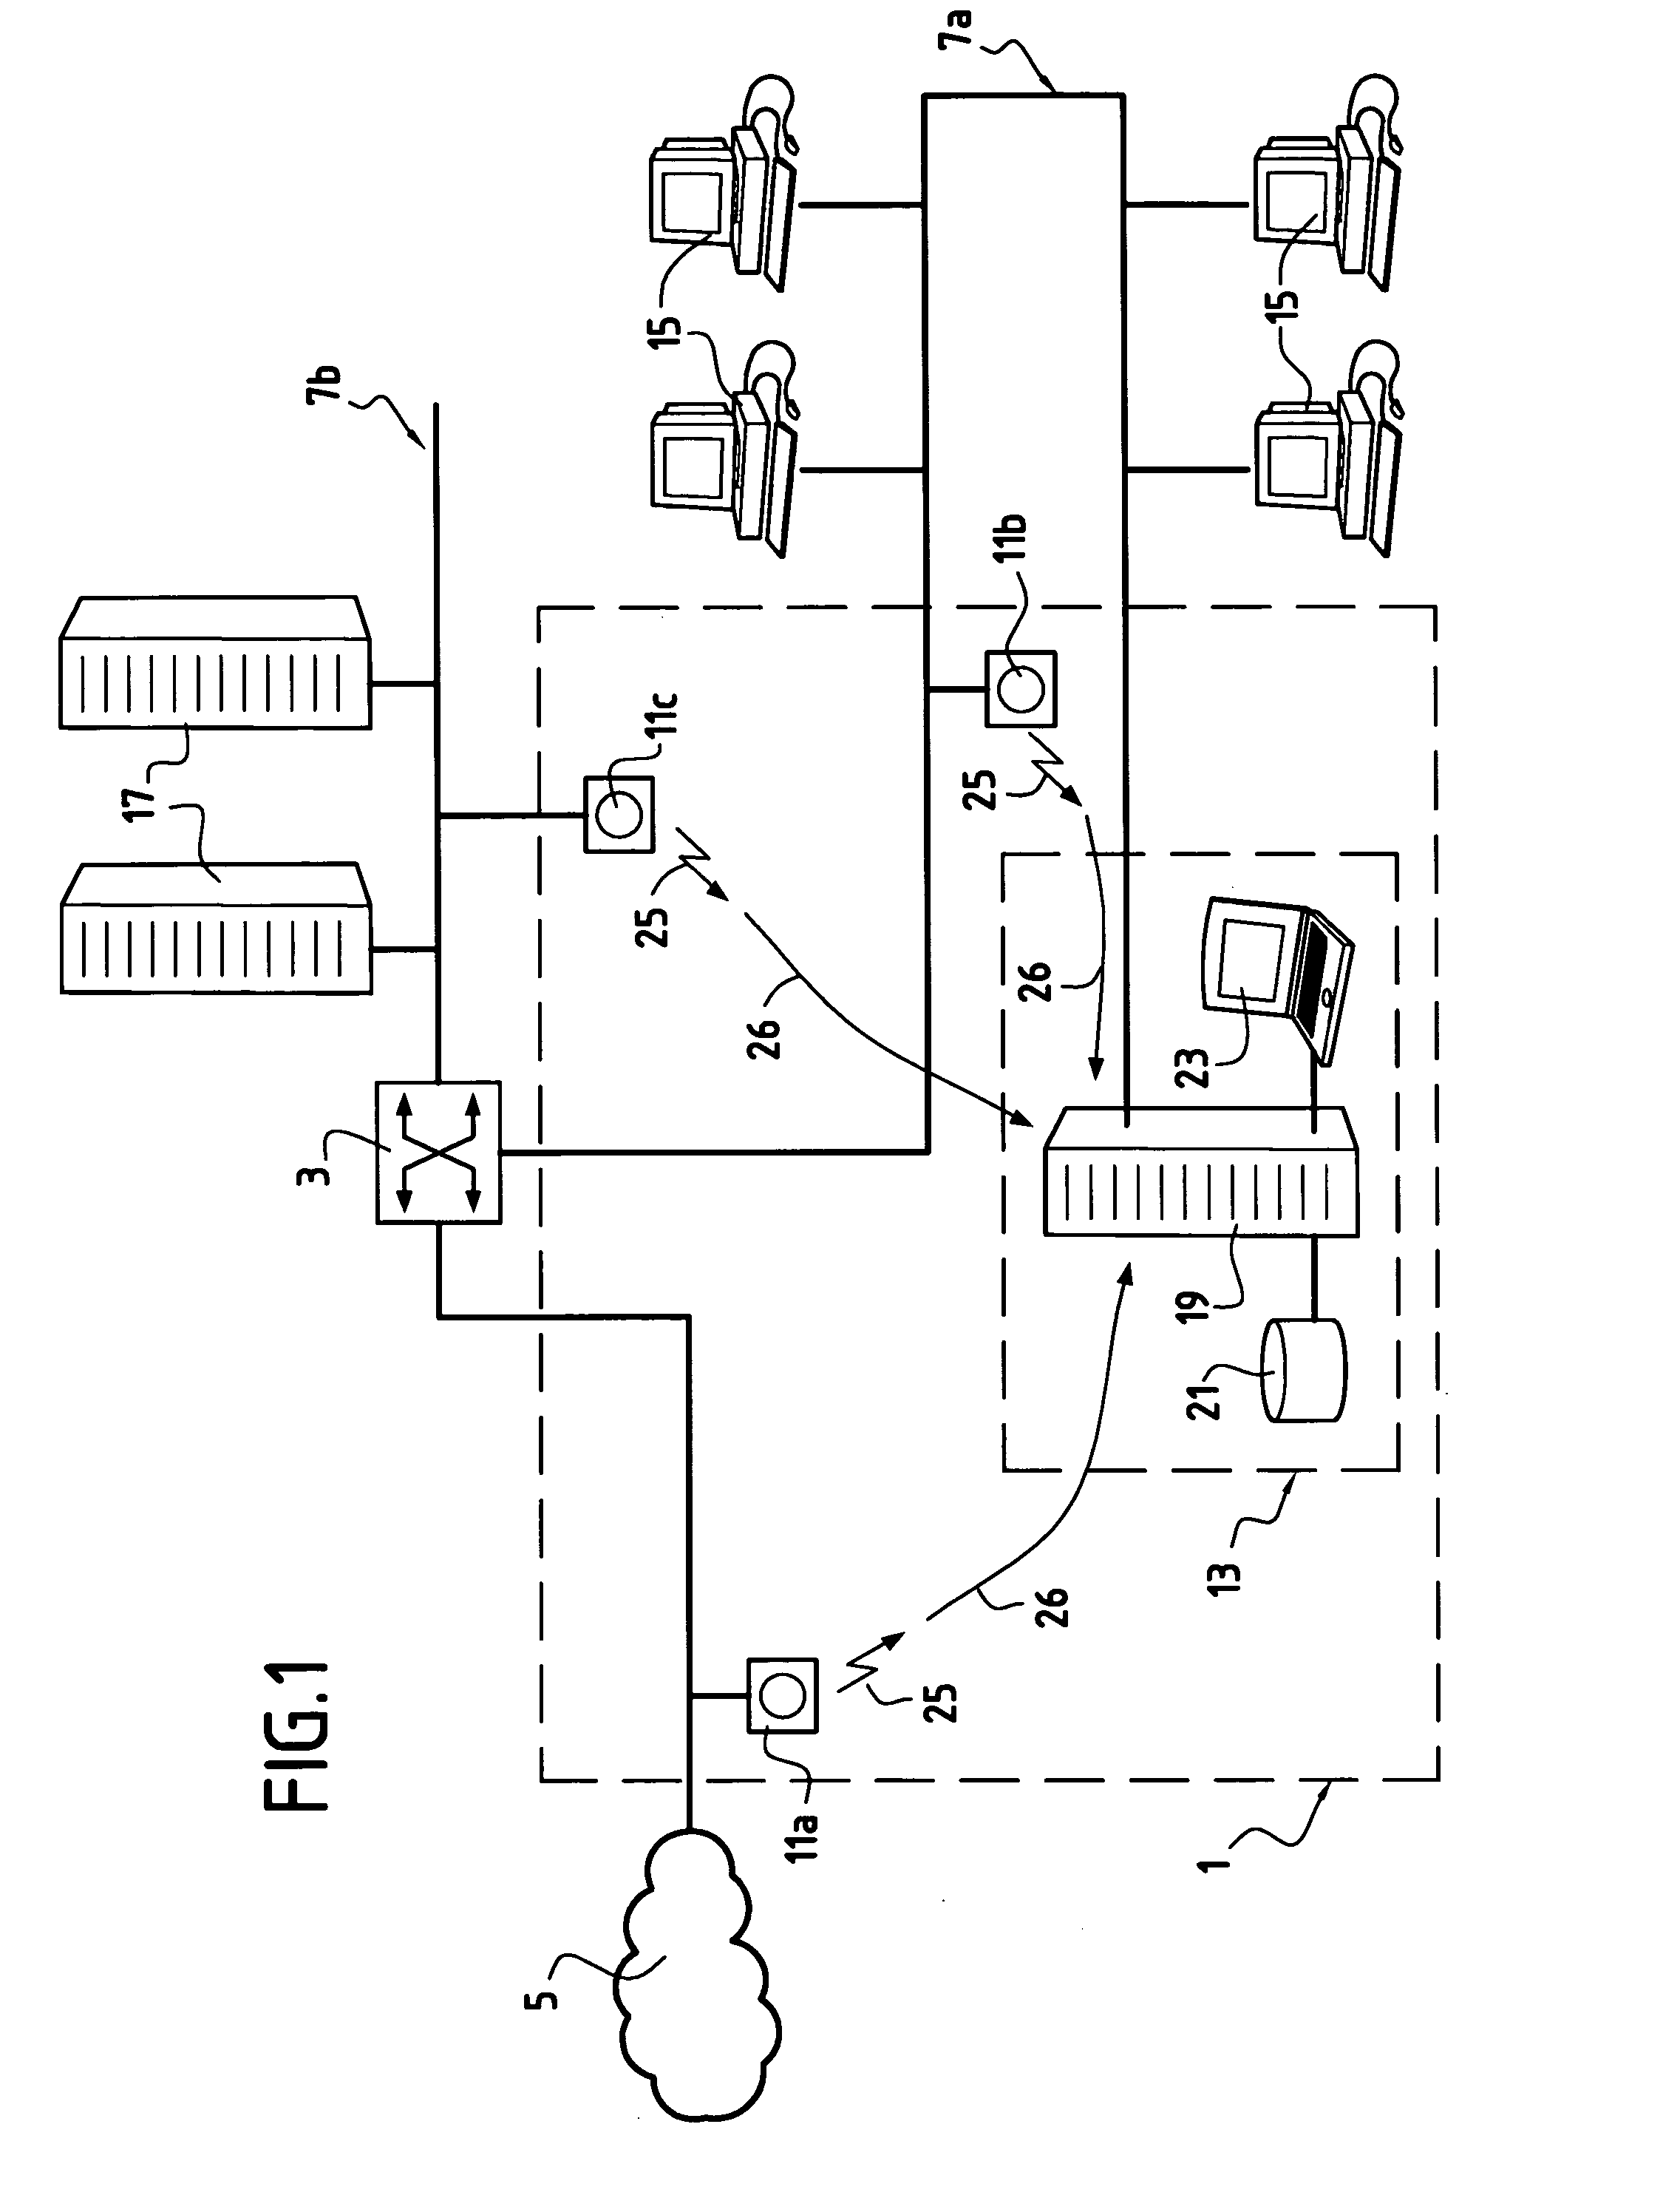 Method of automatically classifying a set of alarms emitted by sensors for detecting intrusions of an information security system